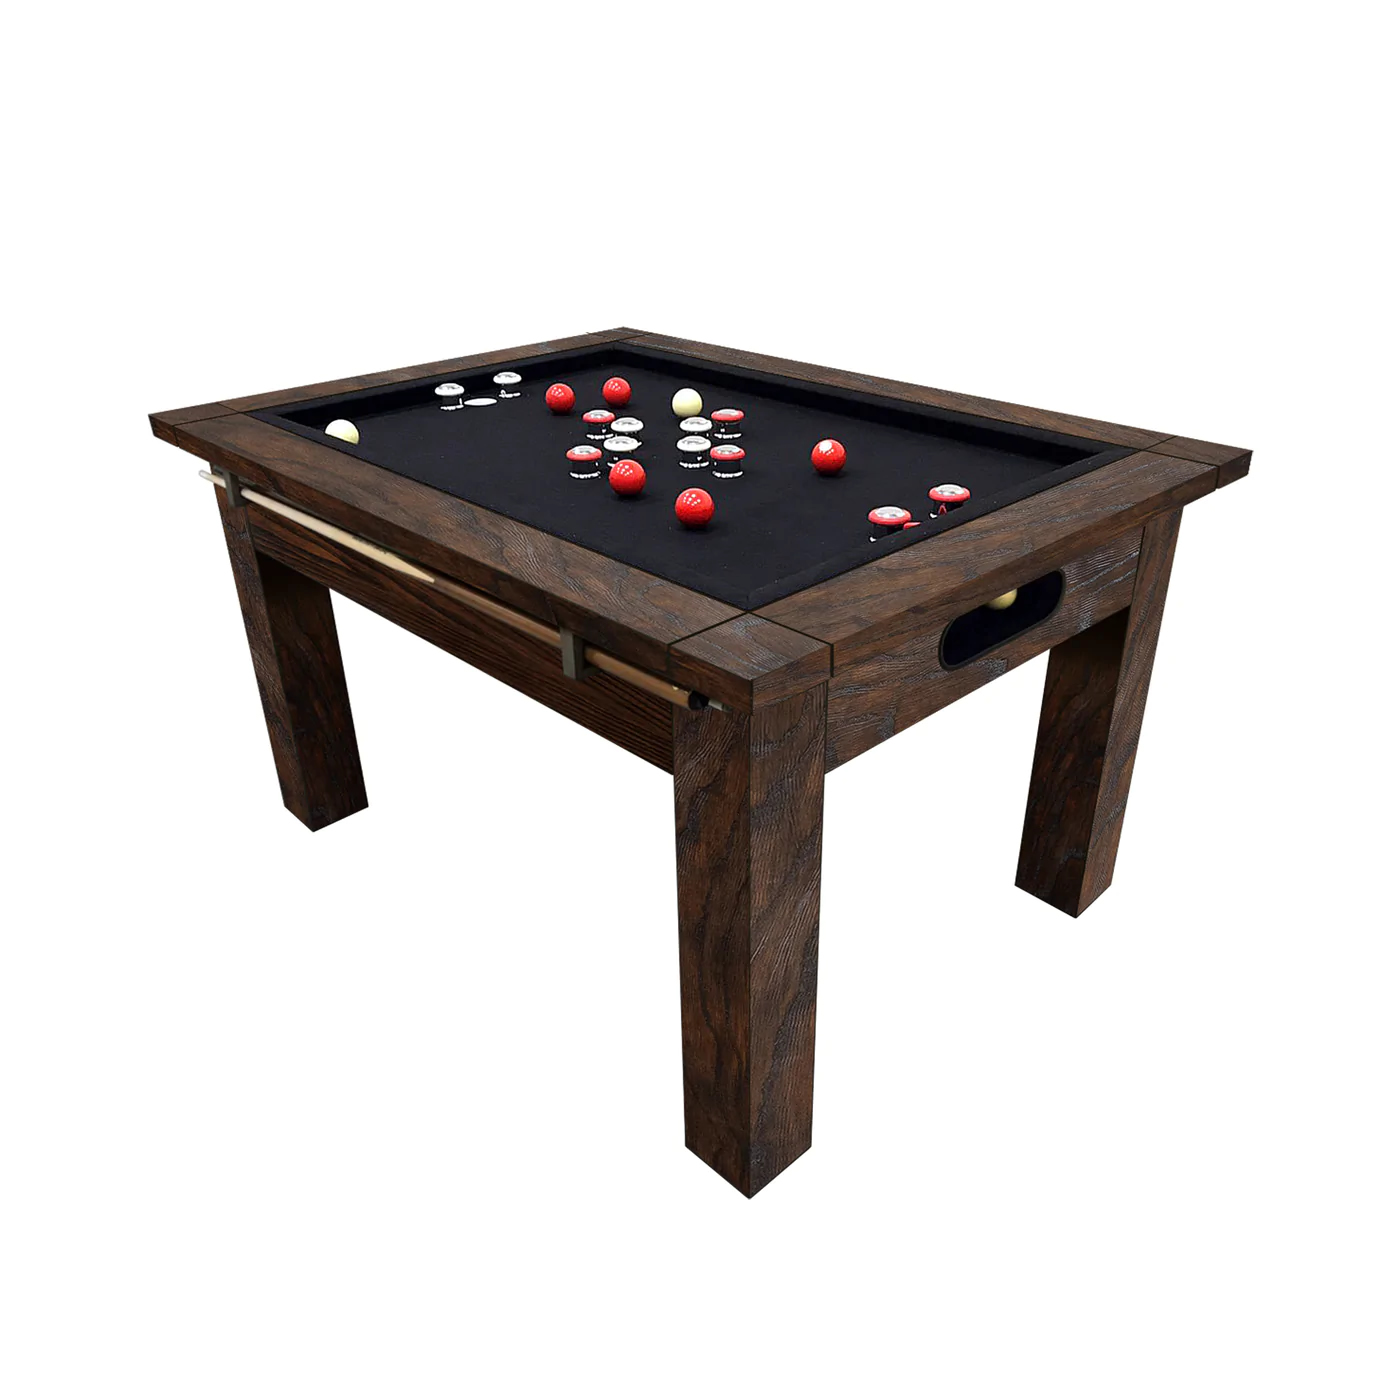 Harpeth Bumper Pool Table by Legacy Billiards